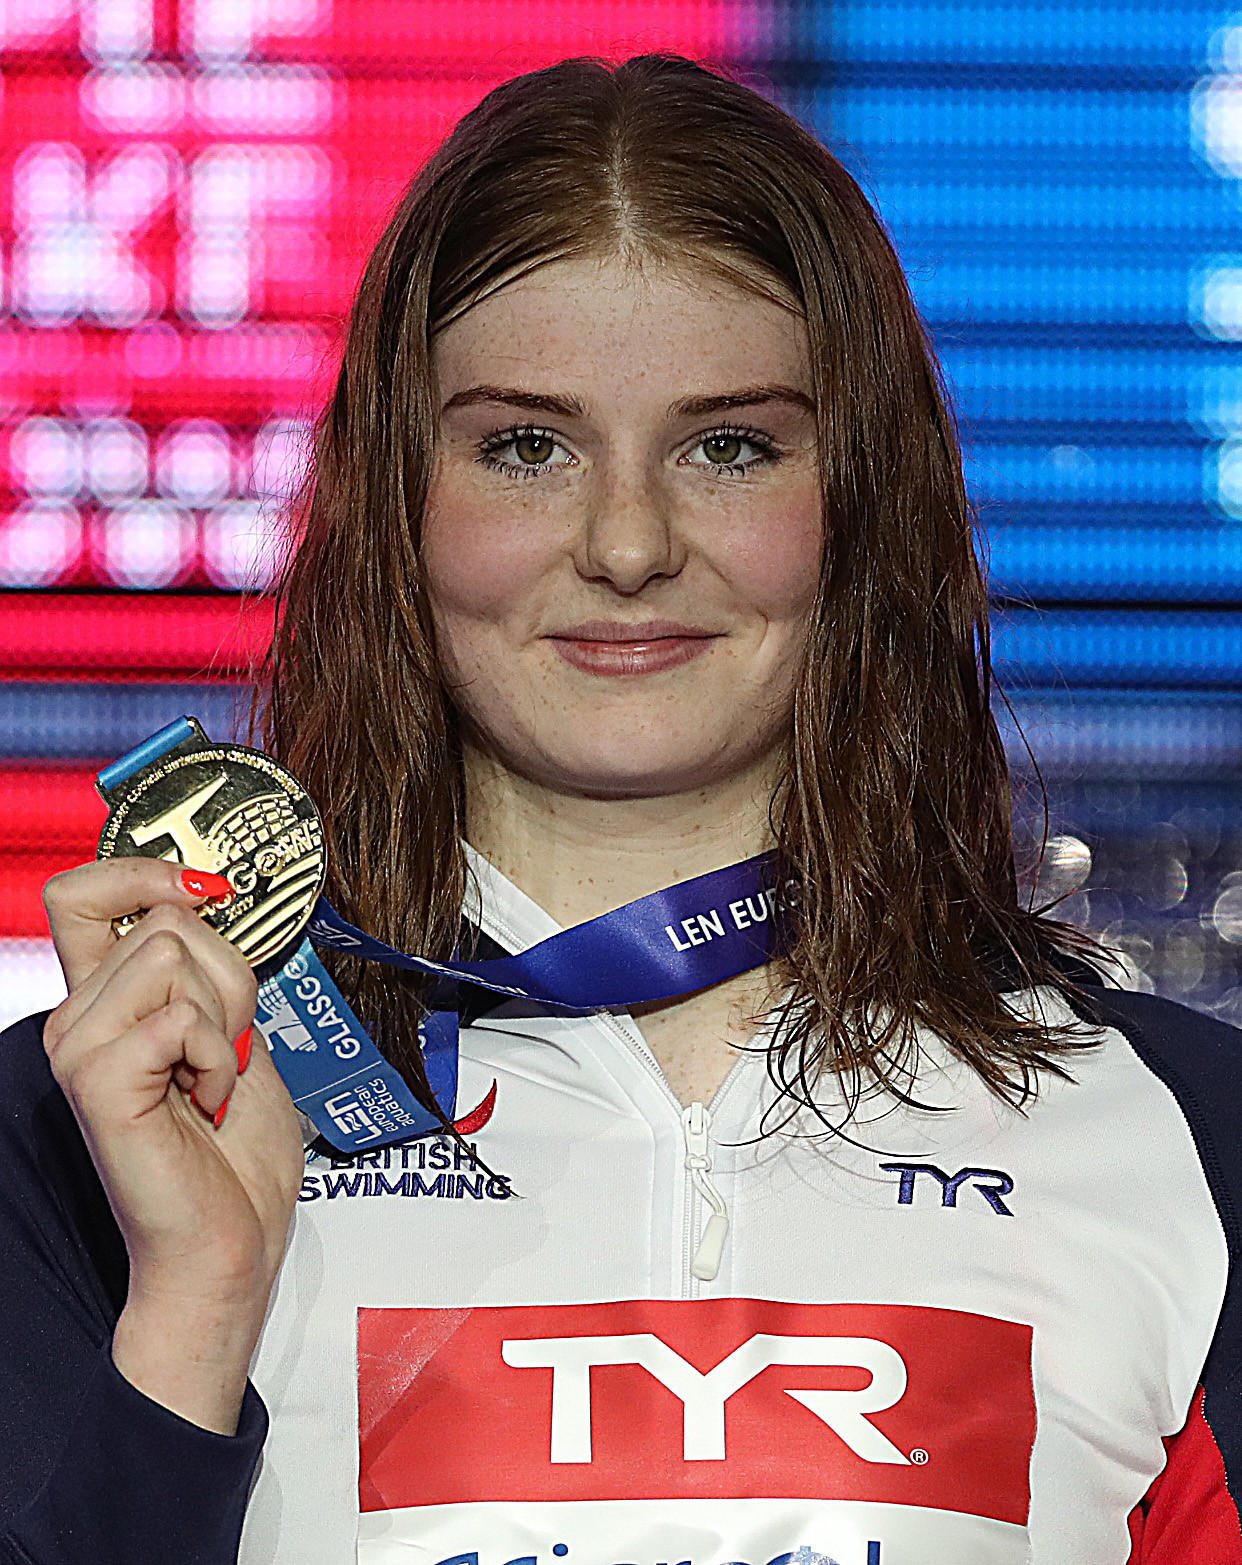 Britain's Freya Anderson celebrated a second gold medal at the European Short Course Championships in Glasgow after adding the 200m freestyle title to her victory in the 100m event last night ©Getty Images